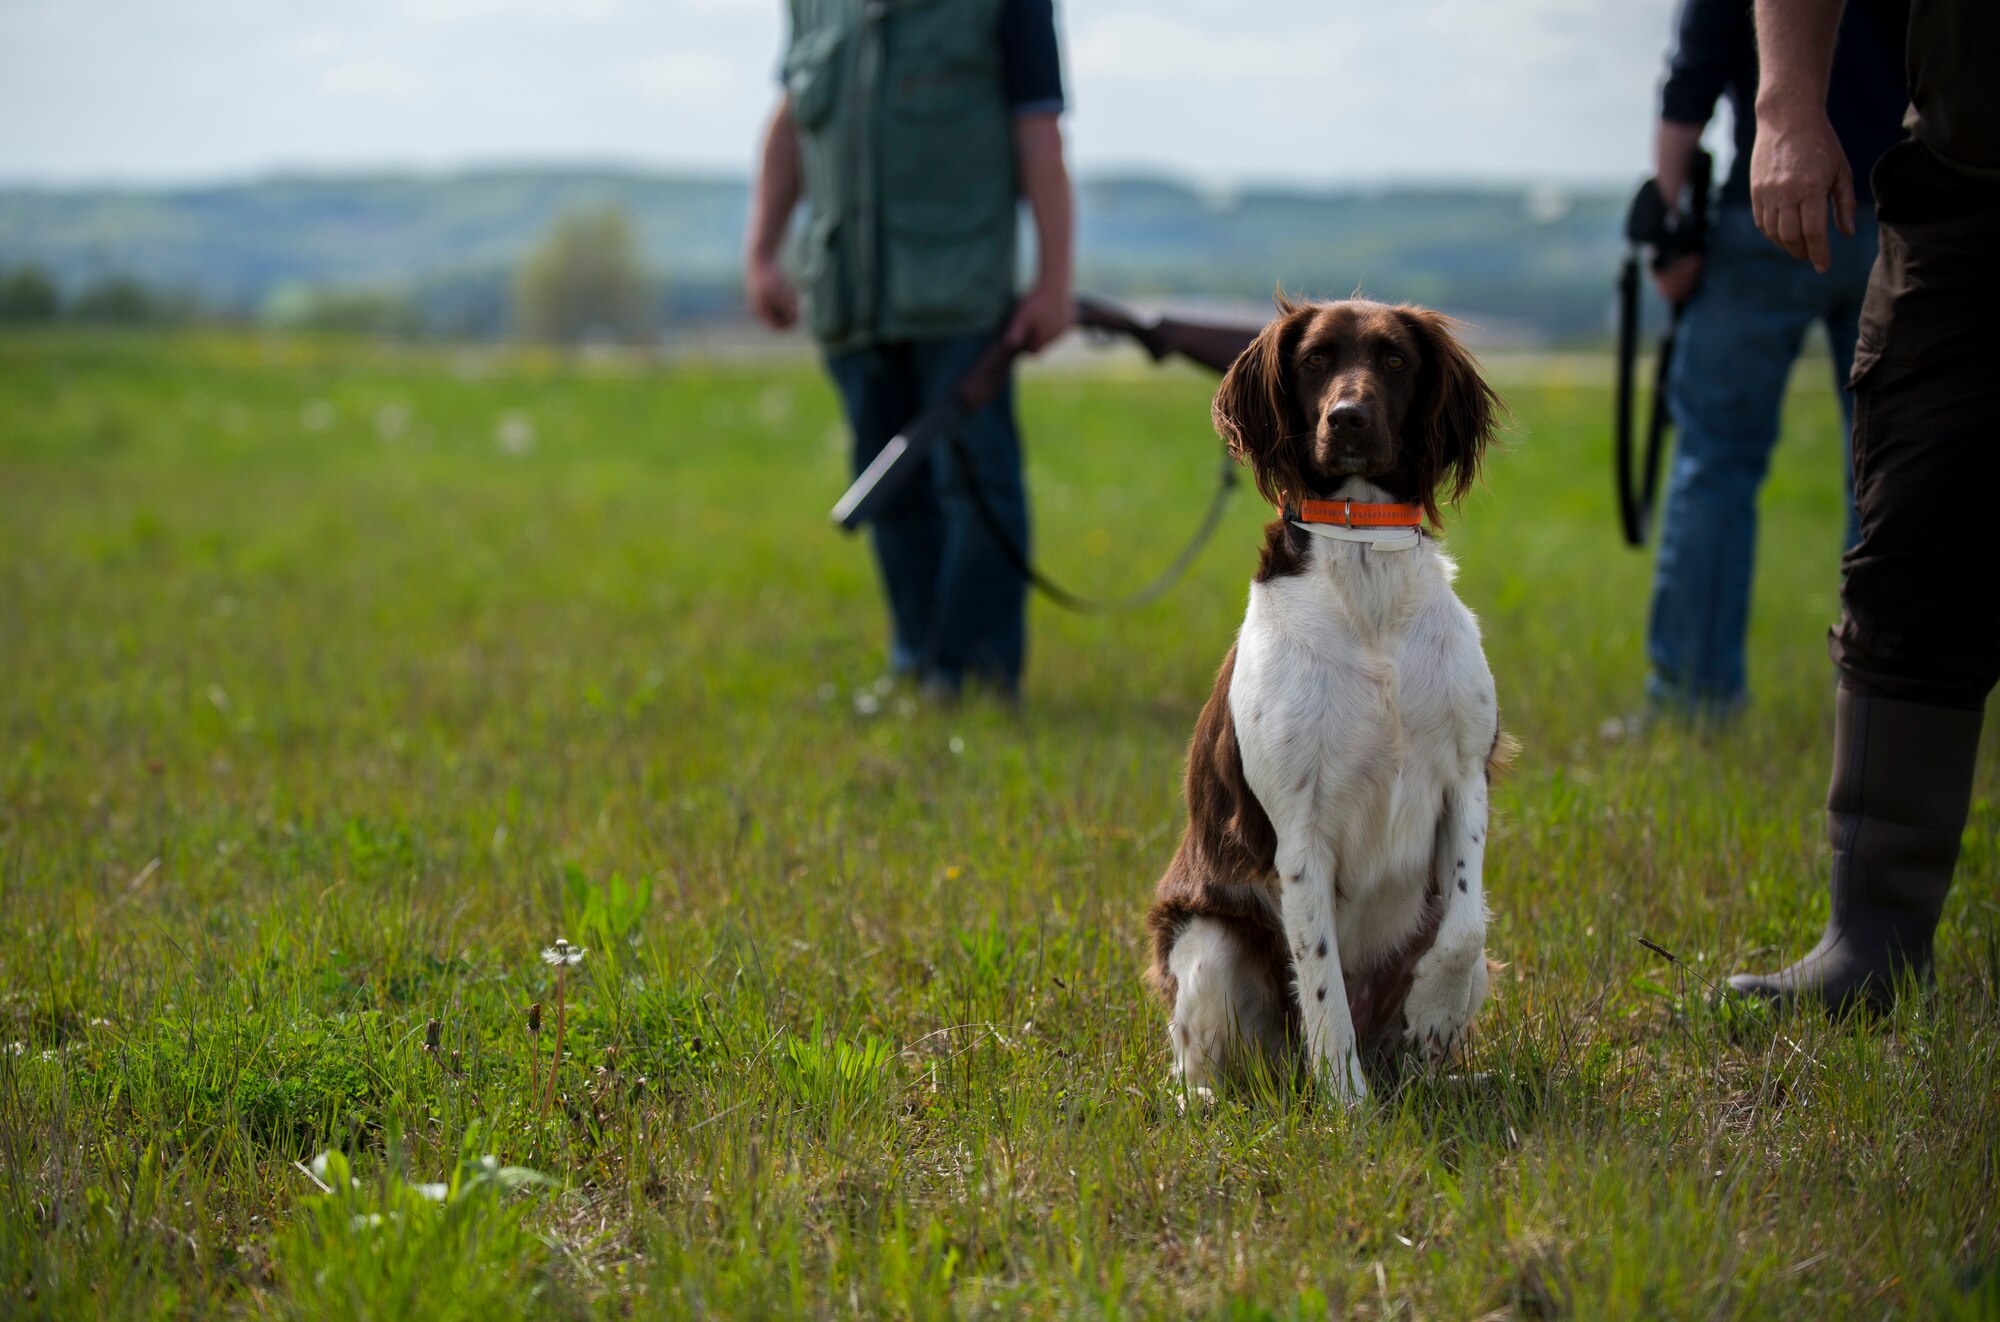 A hunting dog looks out into a field alongside the flightline during a hunting demonstration by the volunteer base hunters at Spangdahlem Air Base, Germany, May 4, 2015. The hunting dogs helped capture and remove 72 animals from the flightline during the hunting season from 2014-2015. (U.S. Air Force photo by Airman 1st Class Luke Kitterman/Released)